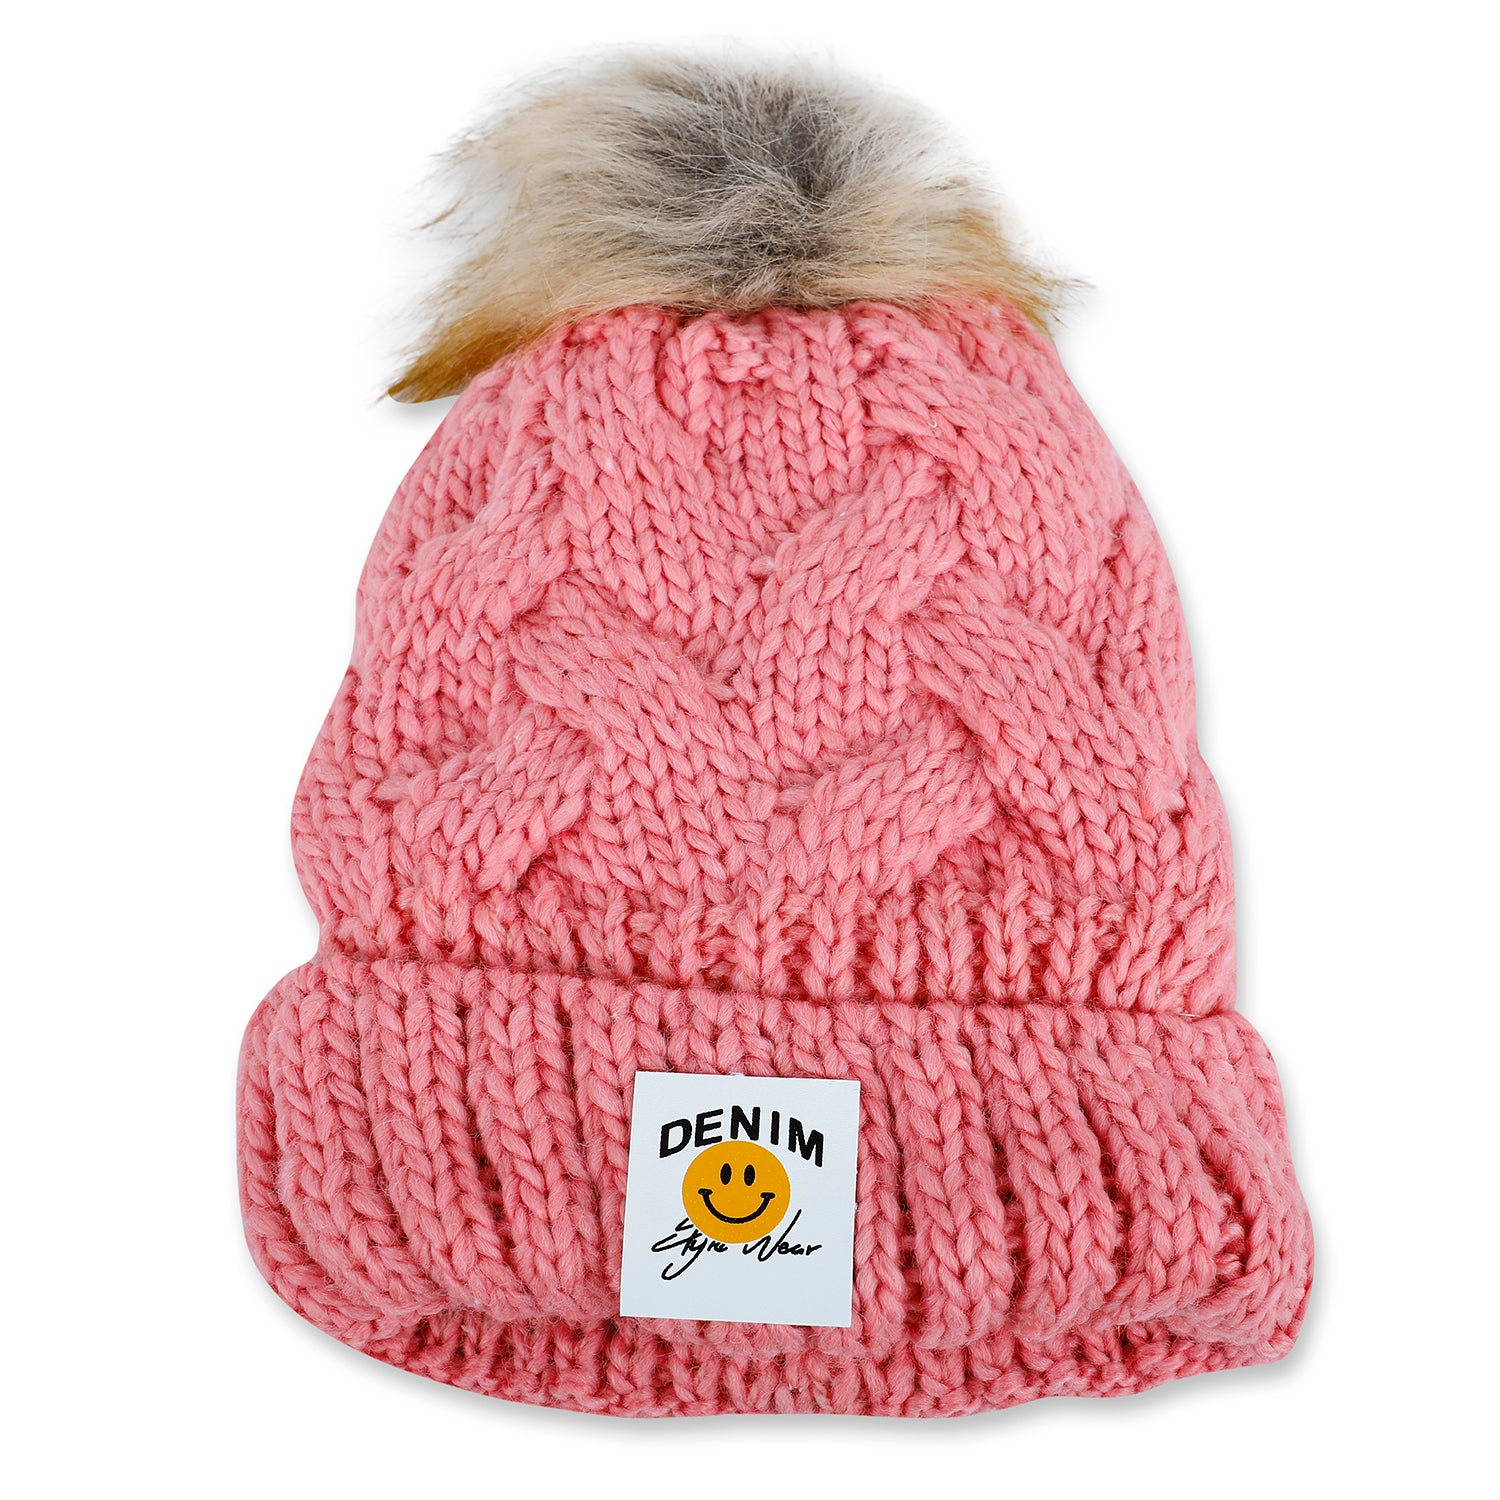 Baby Moo Pom Pom Knitted Woollen Cap - Pink - Baby Moo